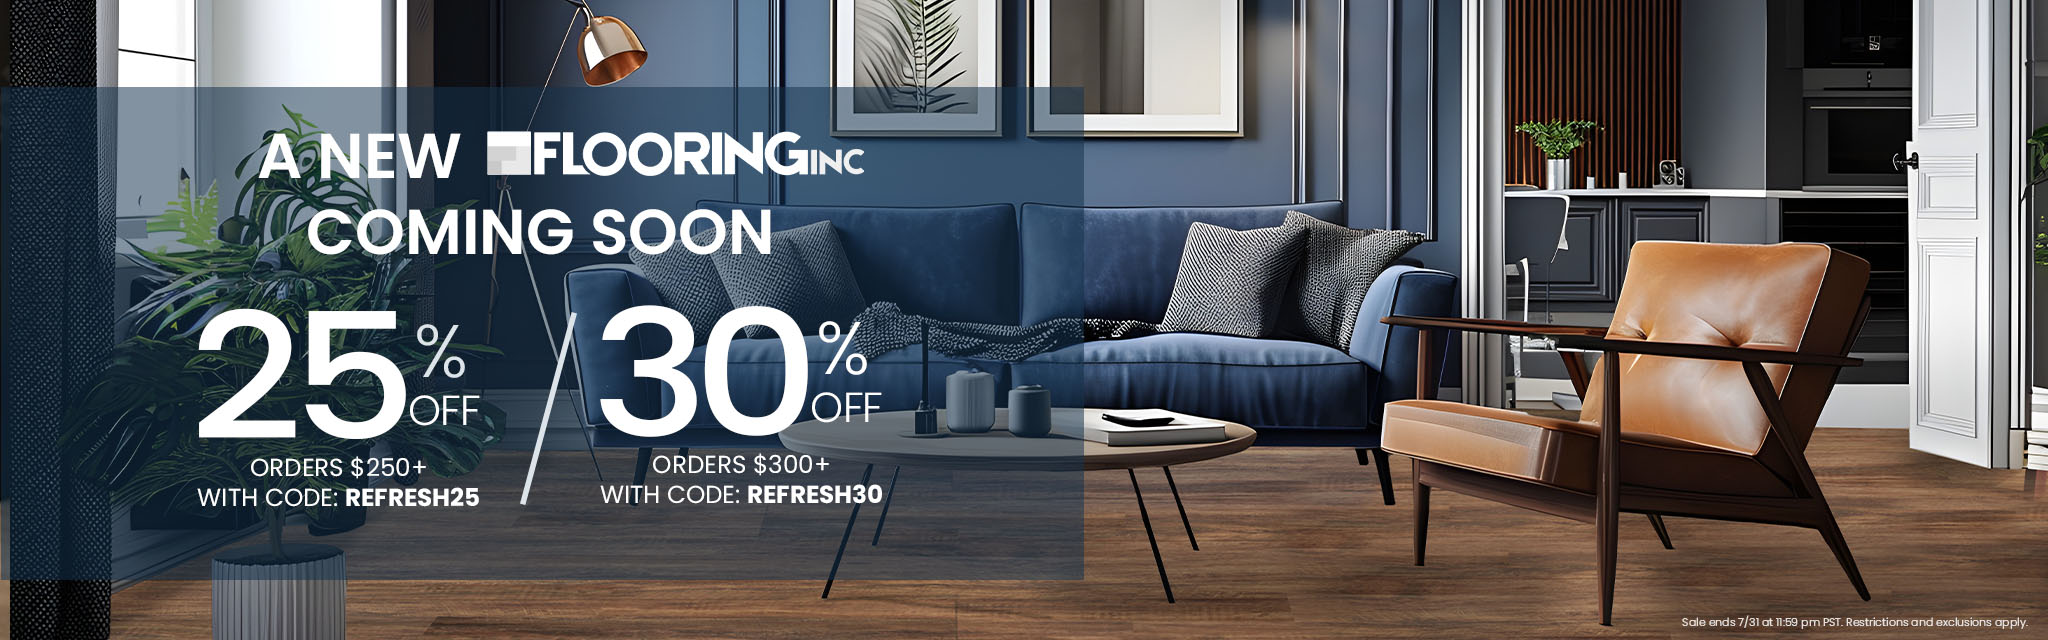 A New Flooring Inc. Coming Soon. 25% Off Orders $250 or more with code: REFERSH25 or 30% Off Orders $300 or more with code: REFRESH30. Sale ends 7/31 at 11:59pm PST. Restrictions and exclusions apply.